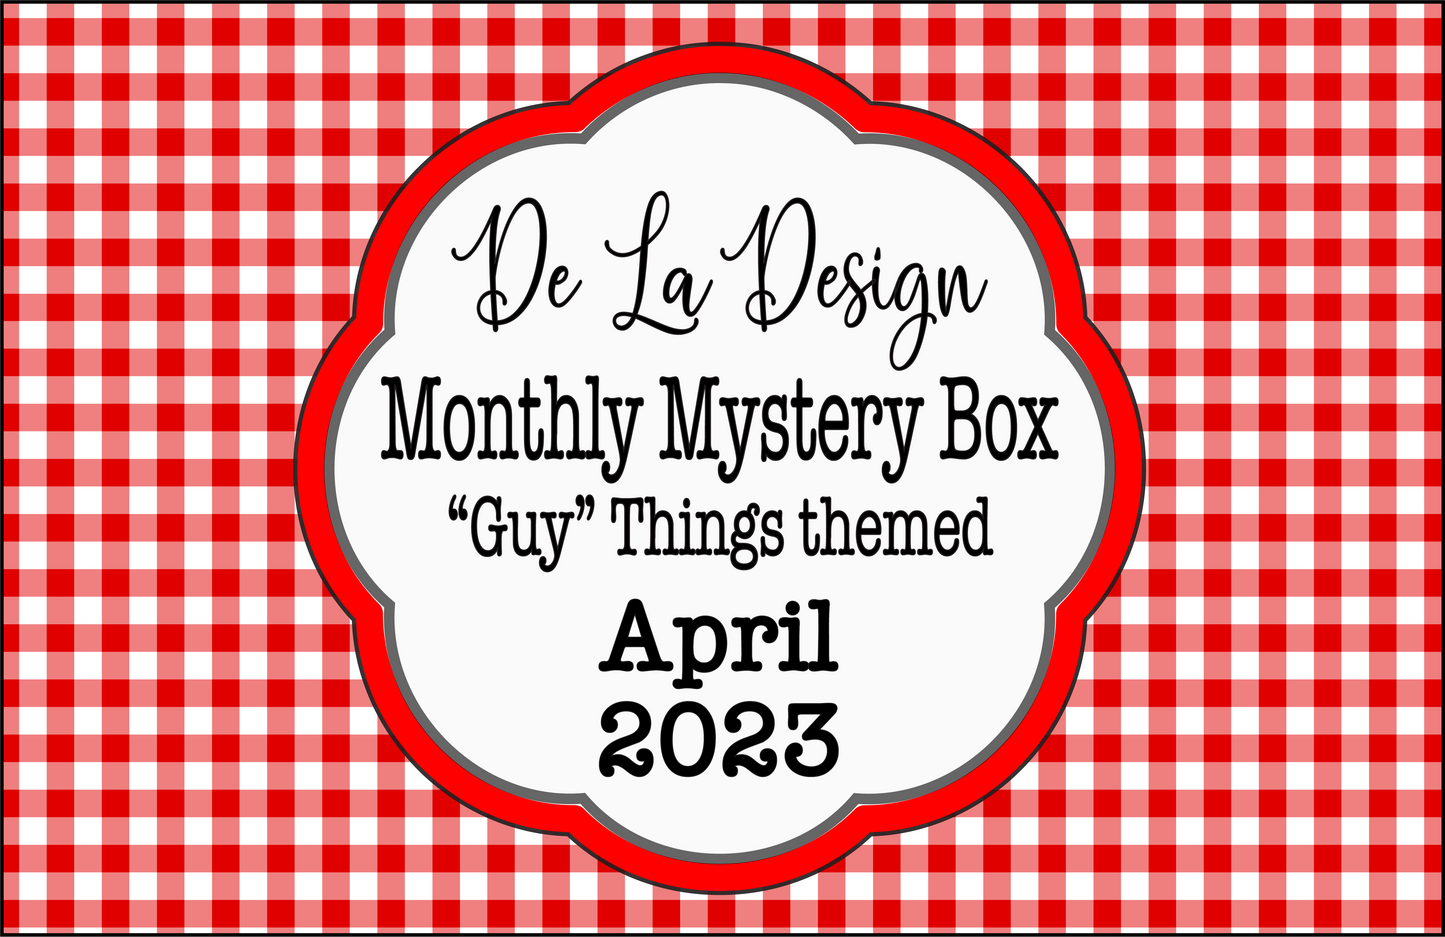 Monthly Mystery Box - April 2023 - Guy things themed